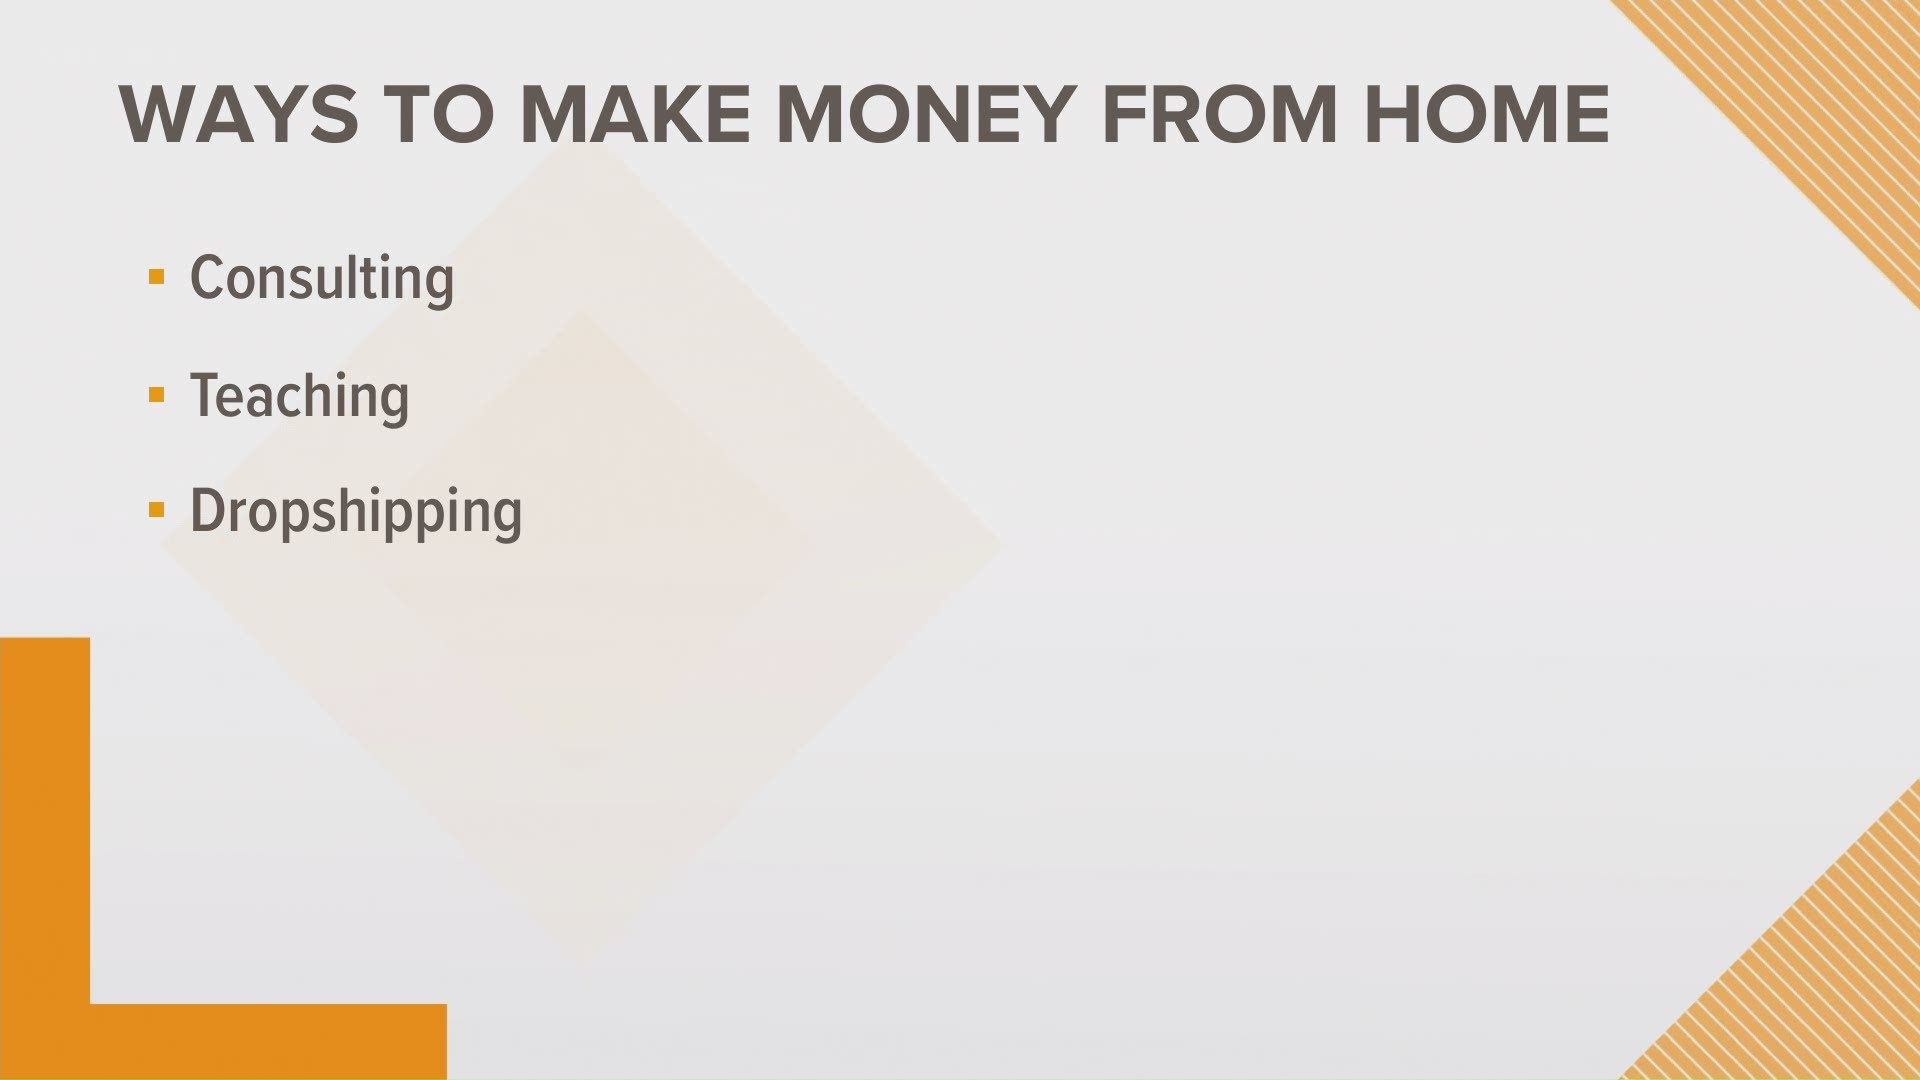 Know Money Inc.'s Steven Hughes provides three ways for you to earn more money at home.